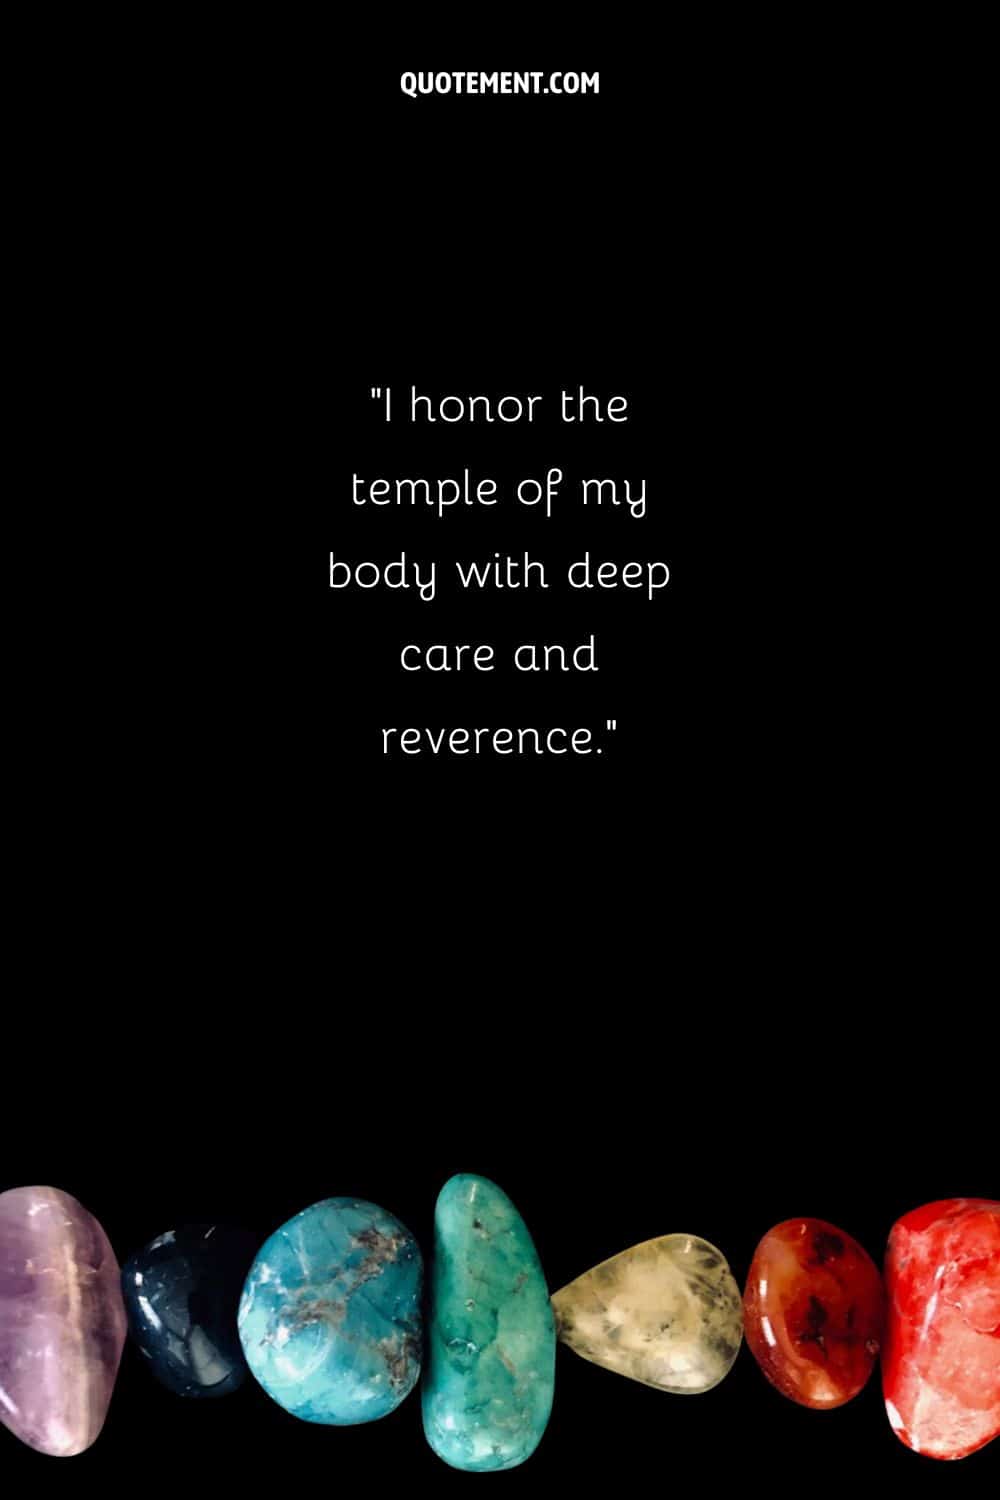 Affirmation for root chakra healing represented by the chakra stones under
